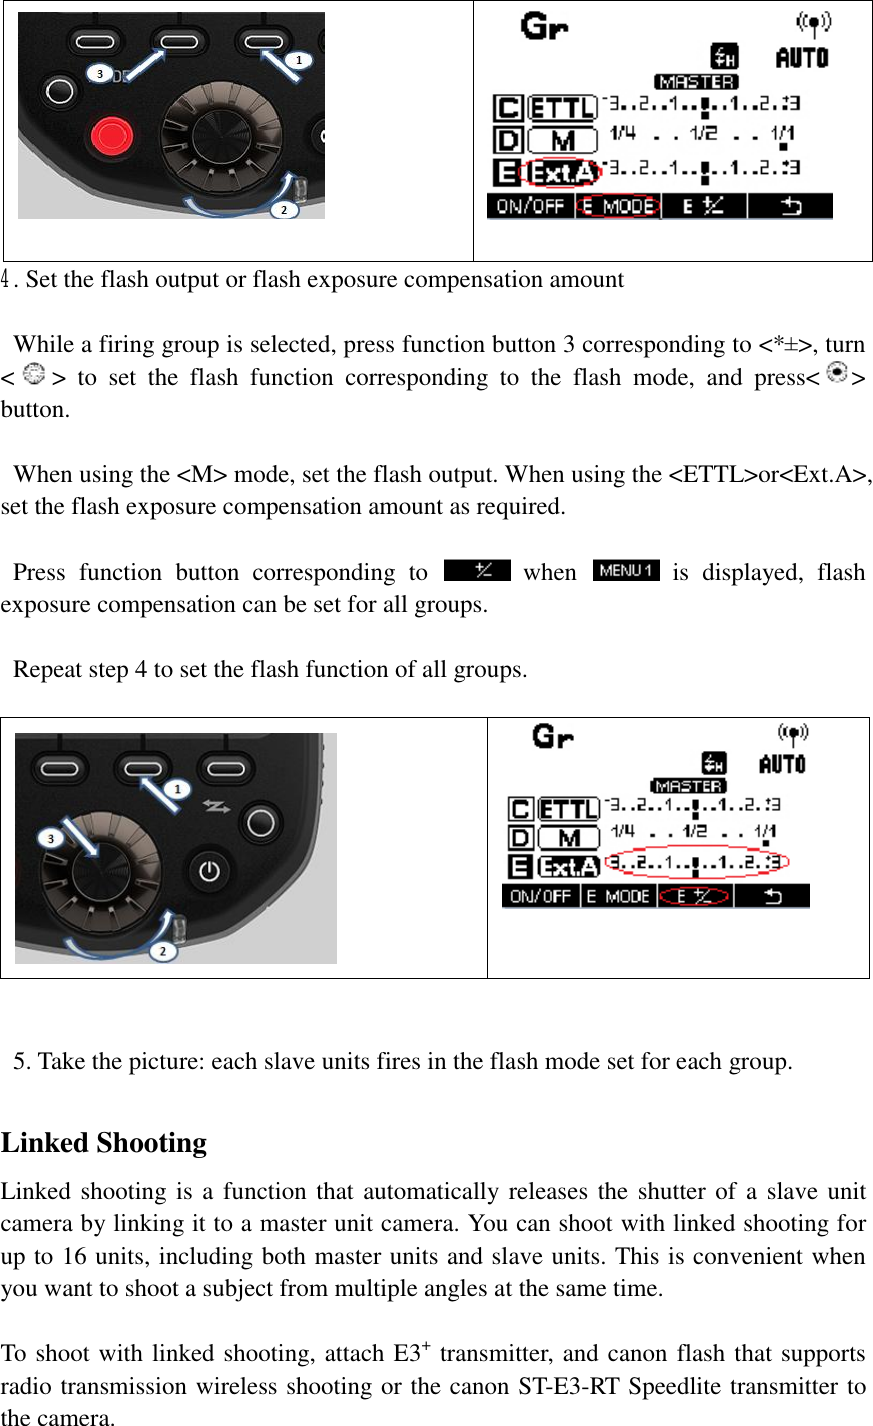    4. Set the flash output or flash exposure compensation amount   While a firing group is selected, press function button 3 corresponding to &lt;*±&gt;, turn &lt;&gt; to set the flash function corresponding to the flash mode, and press&lt; &gt; button.    When using the &lt;M&gt; mode, set the flash output. When using the &lt;ETTL&gt;or&lt;Ext.A&gt;, set the flash exposure compensation amount as required.    Press function button corresponding to   when   is displayed, flash exposure compensation can be set for all groups.    Repeat step 4 to set the flash function of all groups.      5. Take the picture: each slave units fires in the flash mode set for each group.  Linked Shooting Linked shooting is a function that automatically releases the shutter of a slave unit camera by linking it to a master unit camera. You can shoot with linked shooting for up to 16 units, including both master units and slave units. This is convenient when you want to shoot a subject from multiple angles at the same time.   To shoot with linked shooting, attach E3+ transmitter, and canon flash that supports radio transmission wireless shooting or the canon ST-E3-RT Speedlite transmitter to the camera. 